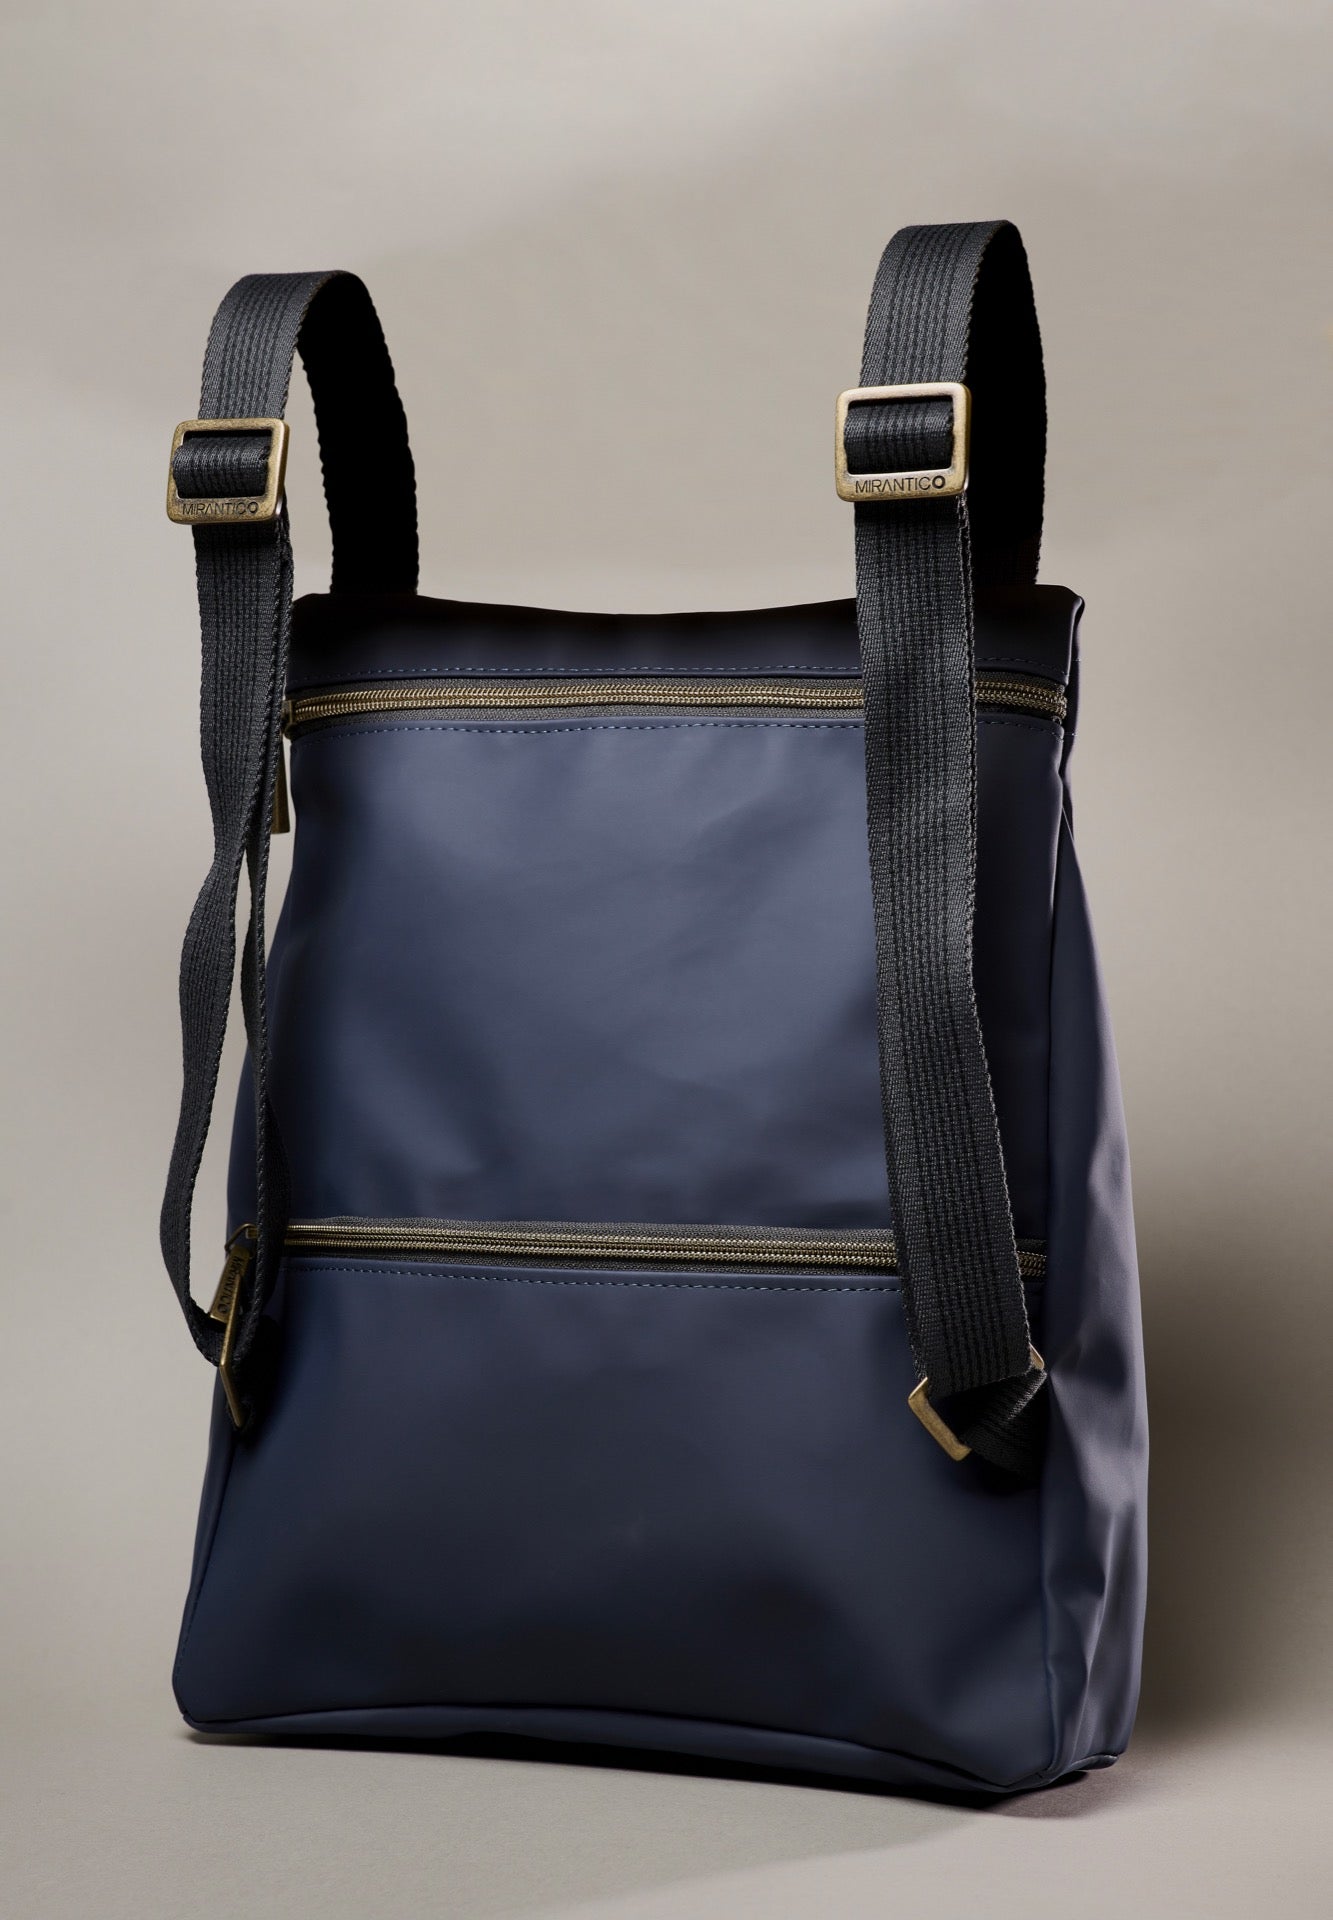 V2 x Mirantico - Blue Memo Bag Backpack with Pocket in Maiolica fabric